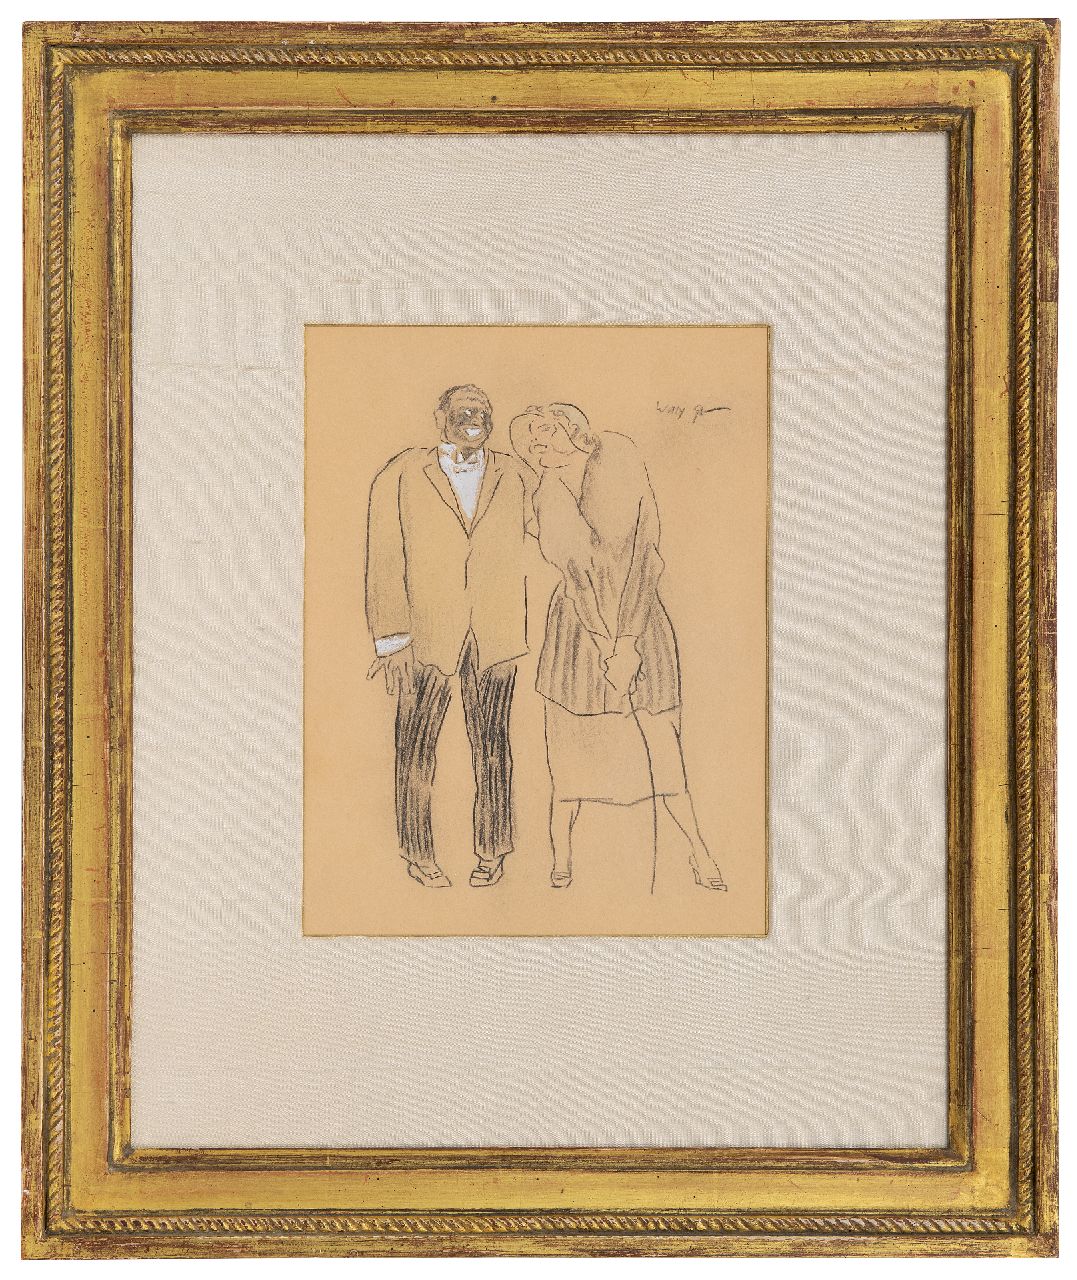 Sluiter J.W.  | Jan Willem 'Willy' Sluiter | Watercolours and drawings offered for sale | Laughing couple, chalk and gouache on paper 24.7 x 18.1 cm, signed u.r.